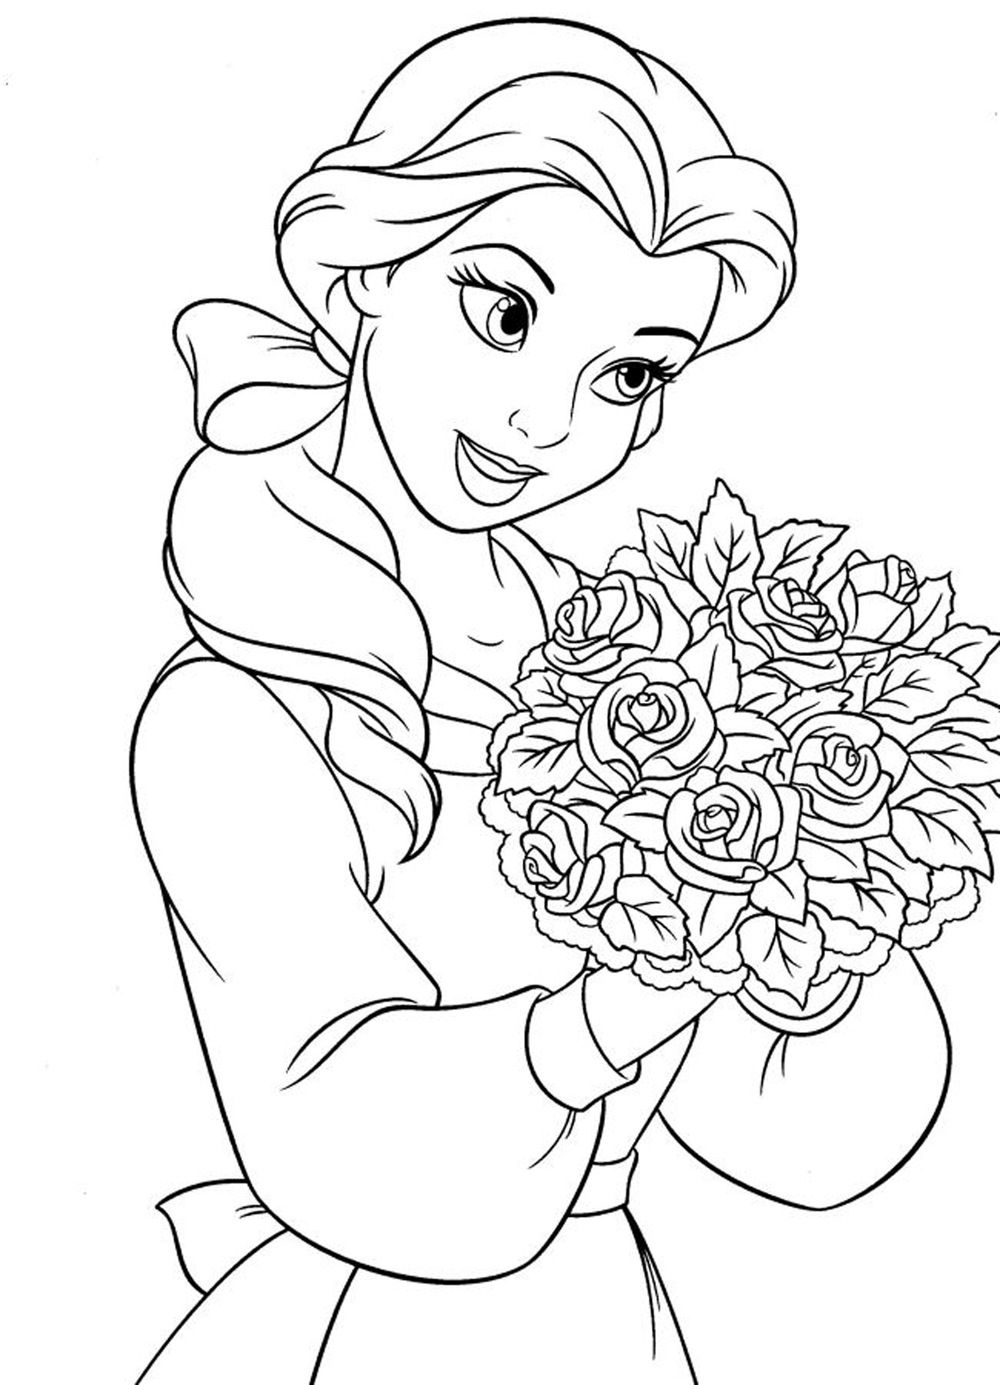 Detailed Coloring Pages For Girls at GetColorings.com | Free printable